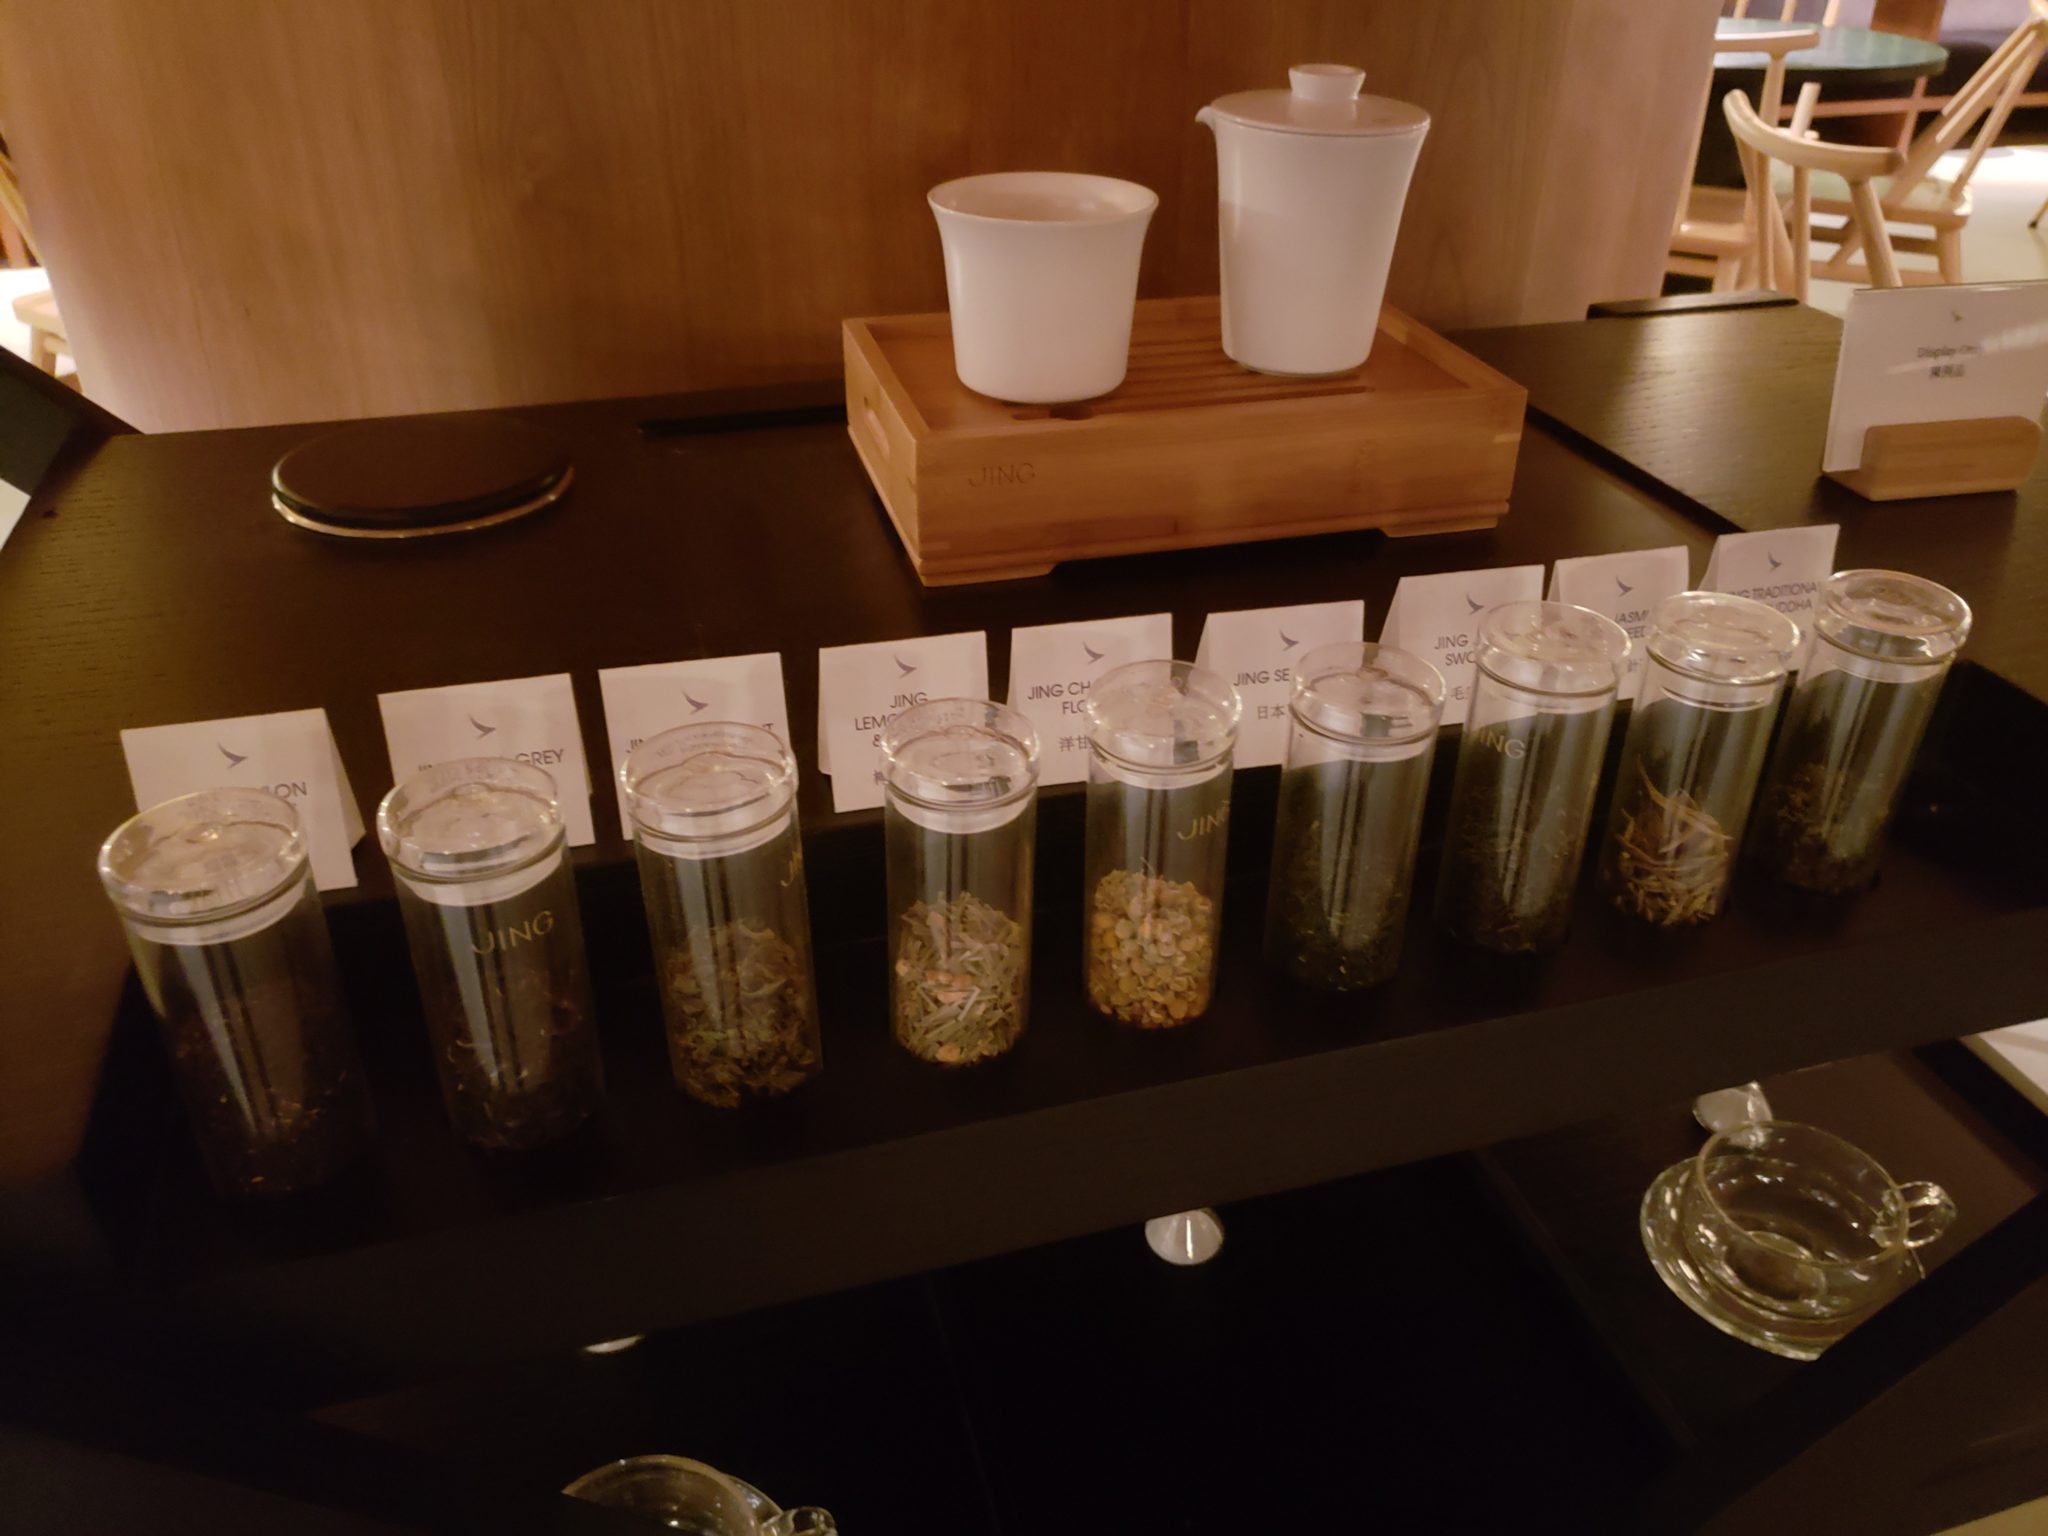 a row of glass containers with different herbs on a table